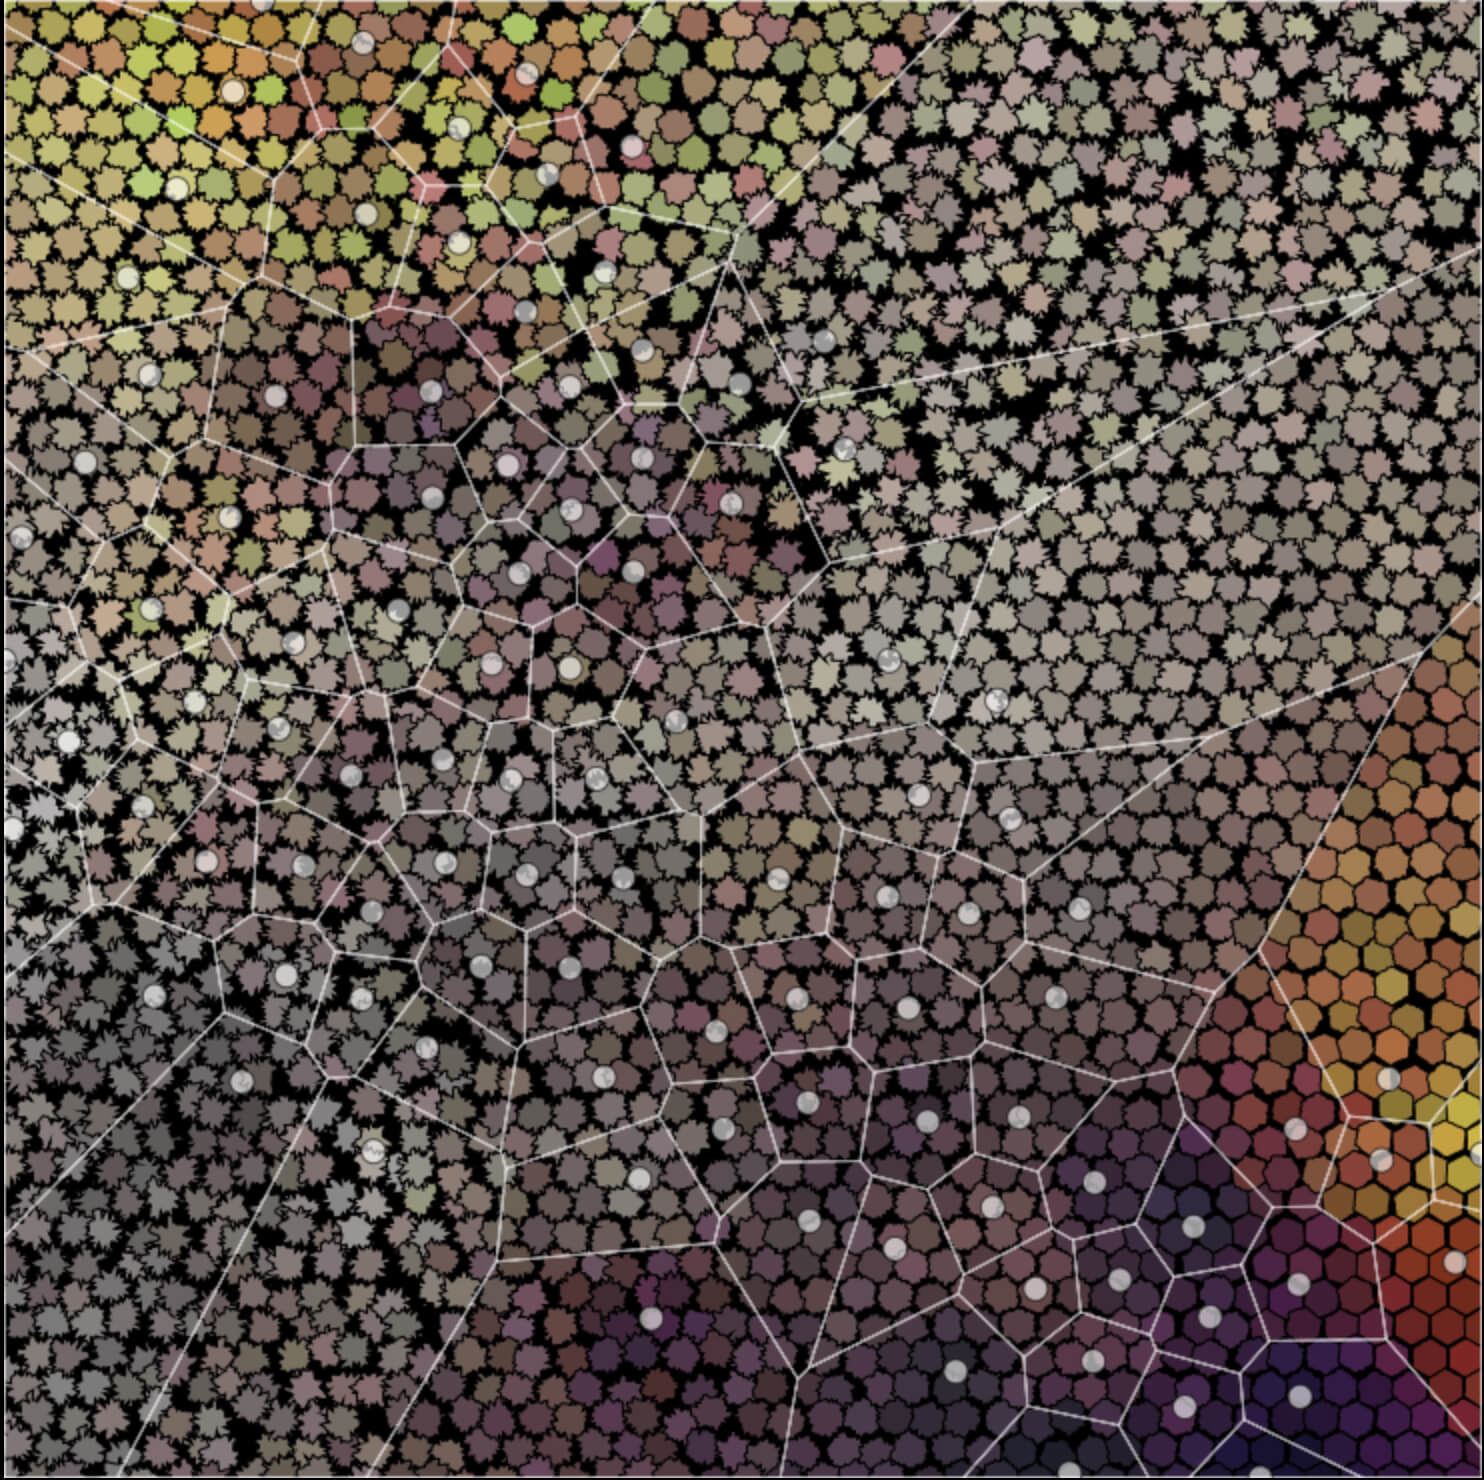 A preview of the texture map found at https://grrrr.org/data/research/texmap/.